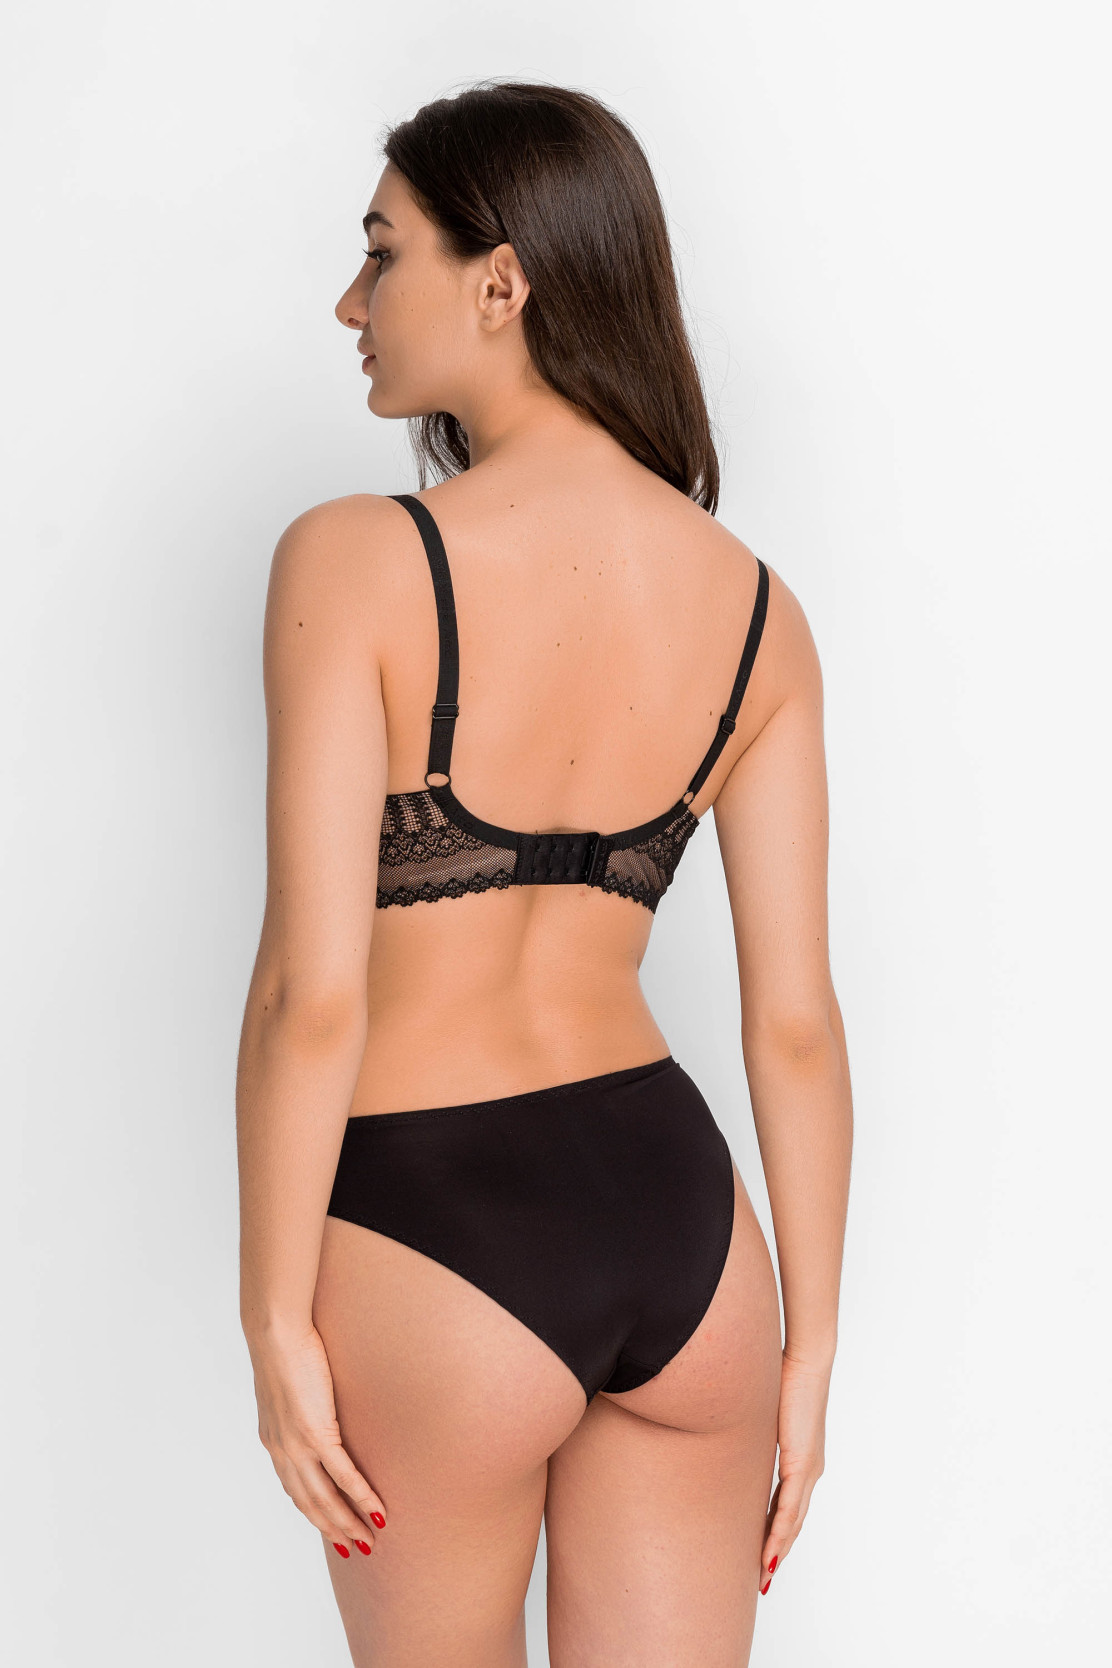 Buy online Black Cotton Bras And Panty Set from lingerie for Women by  Liigne for ₹309 at 76% off